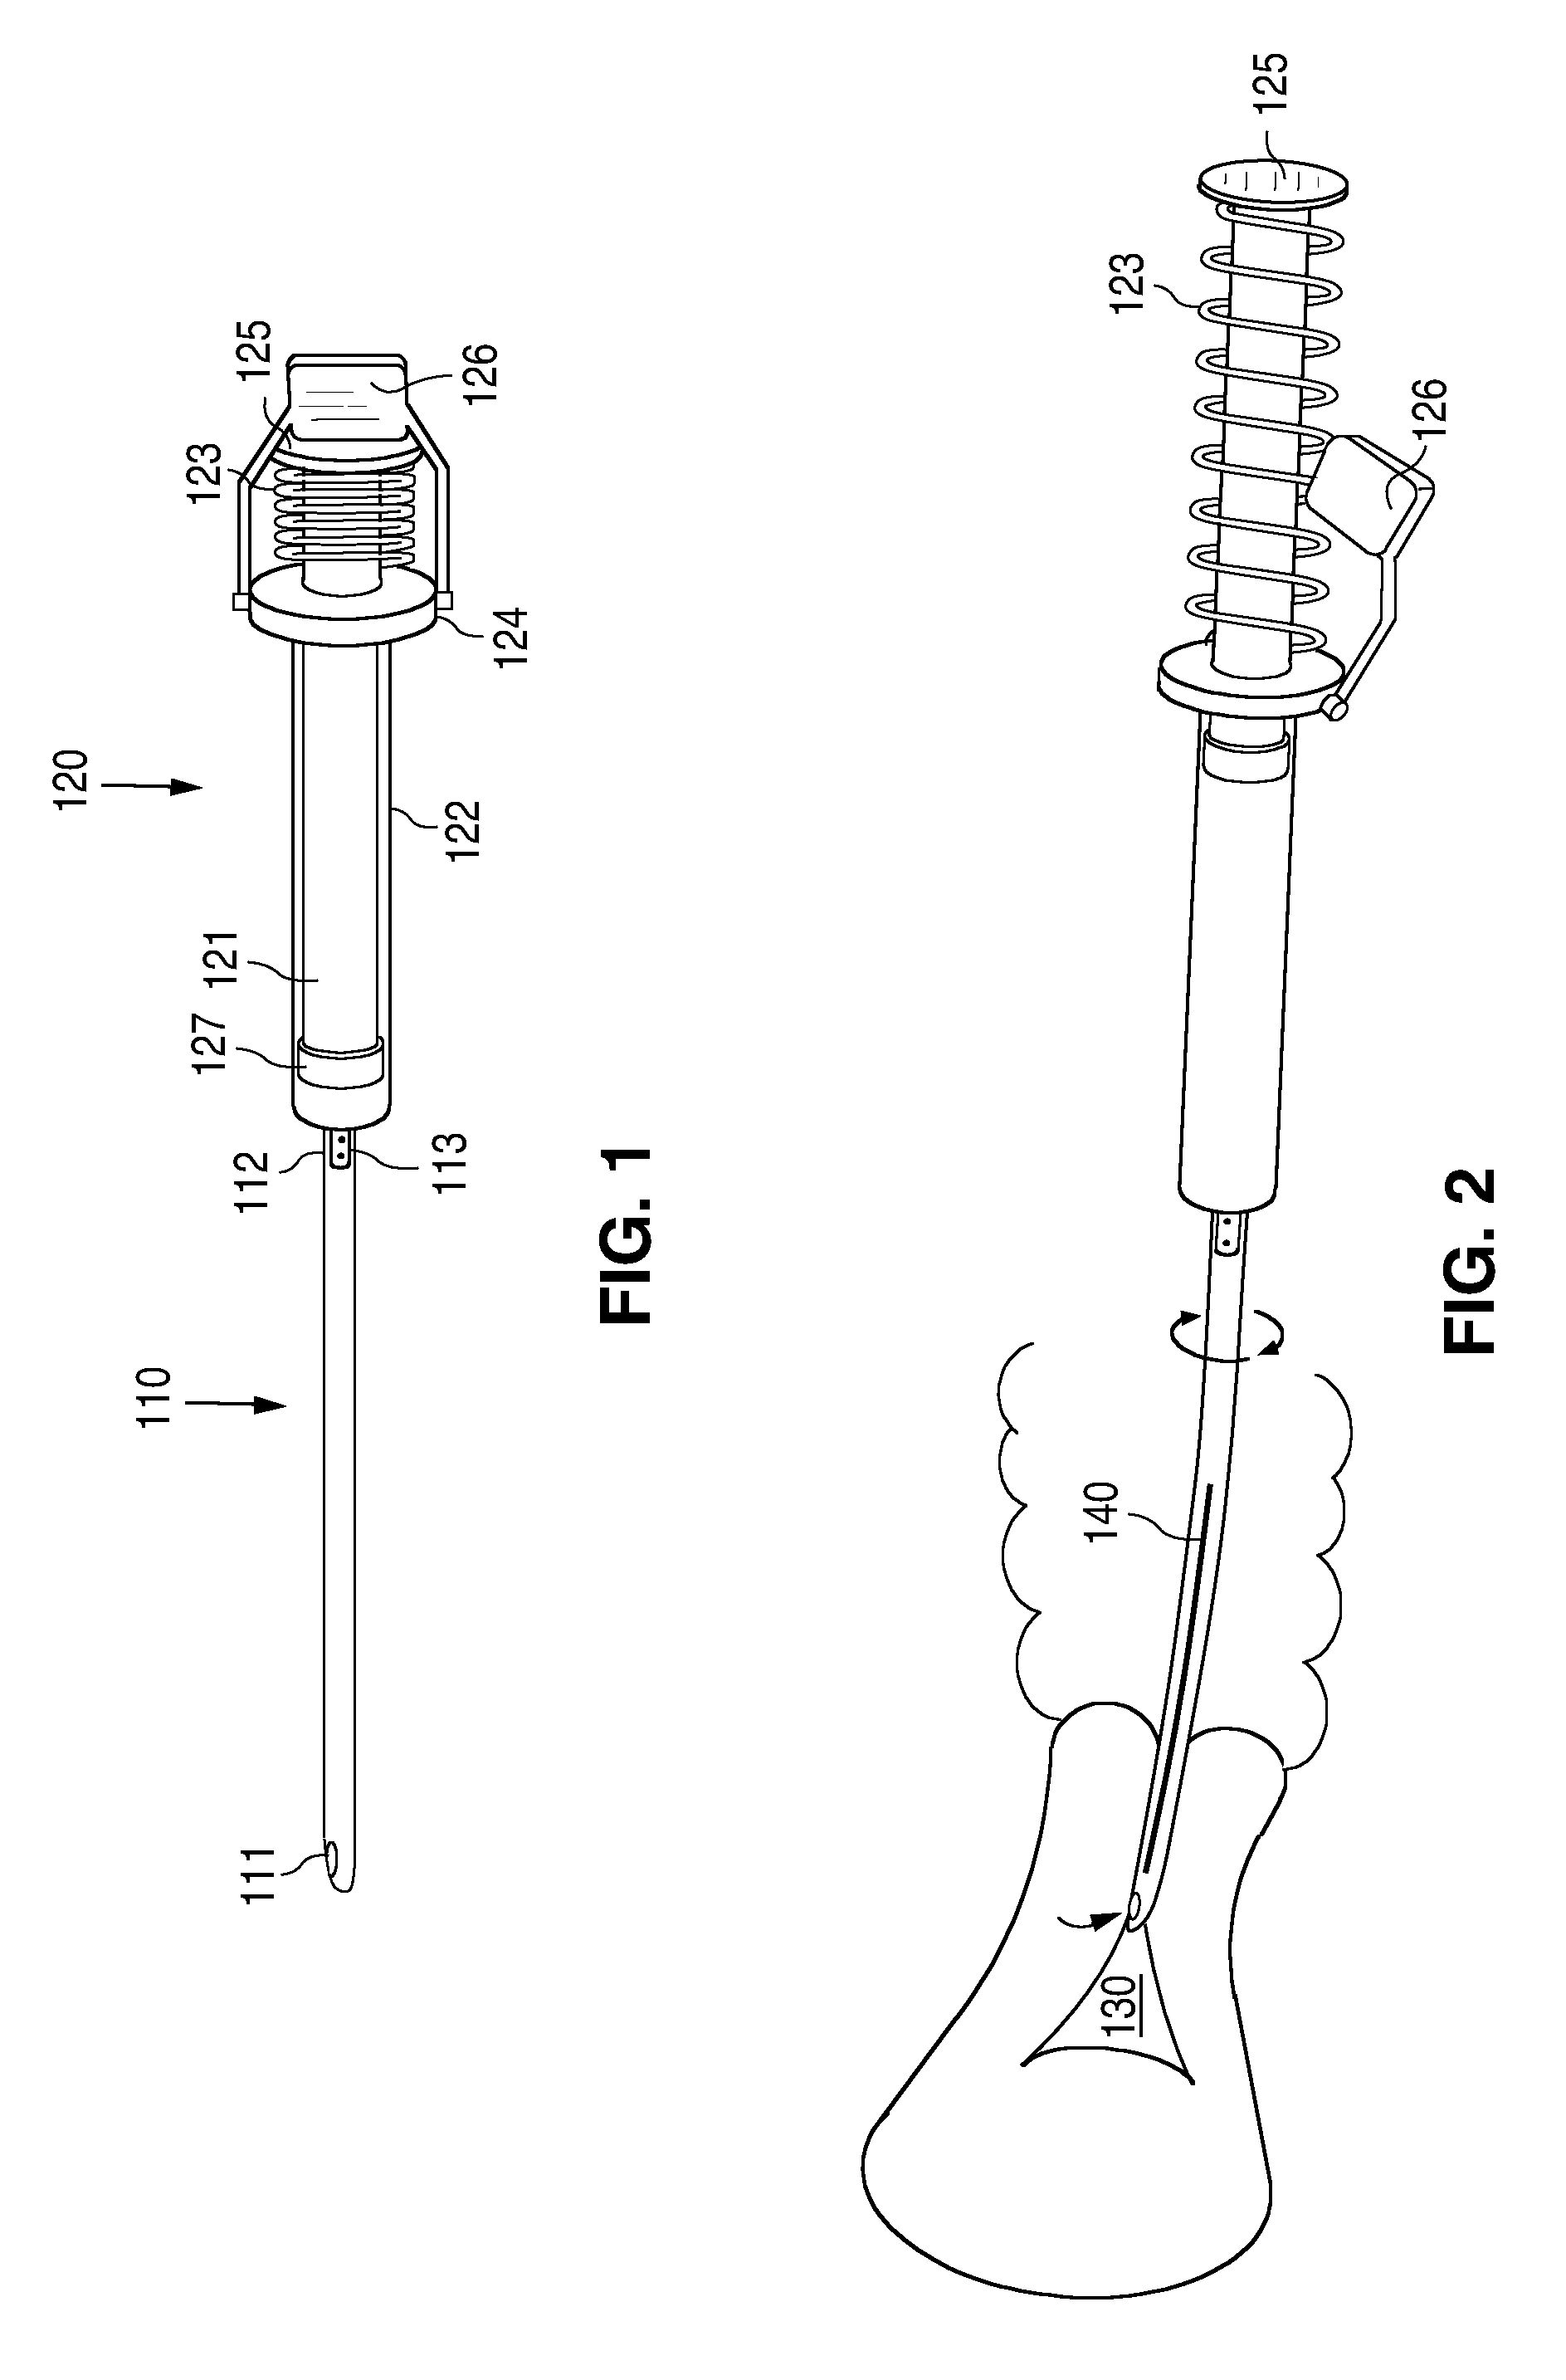 Biopsy device with automatic aspiration